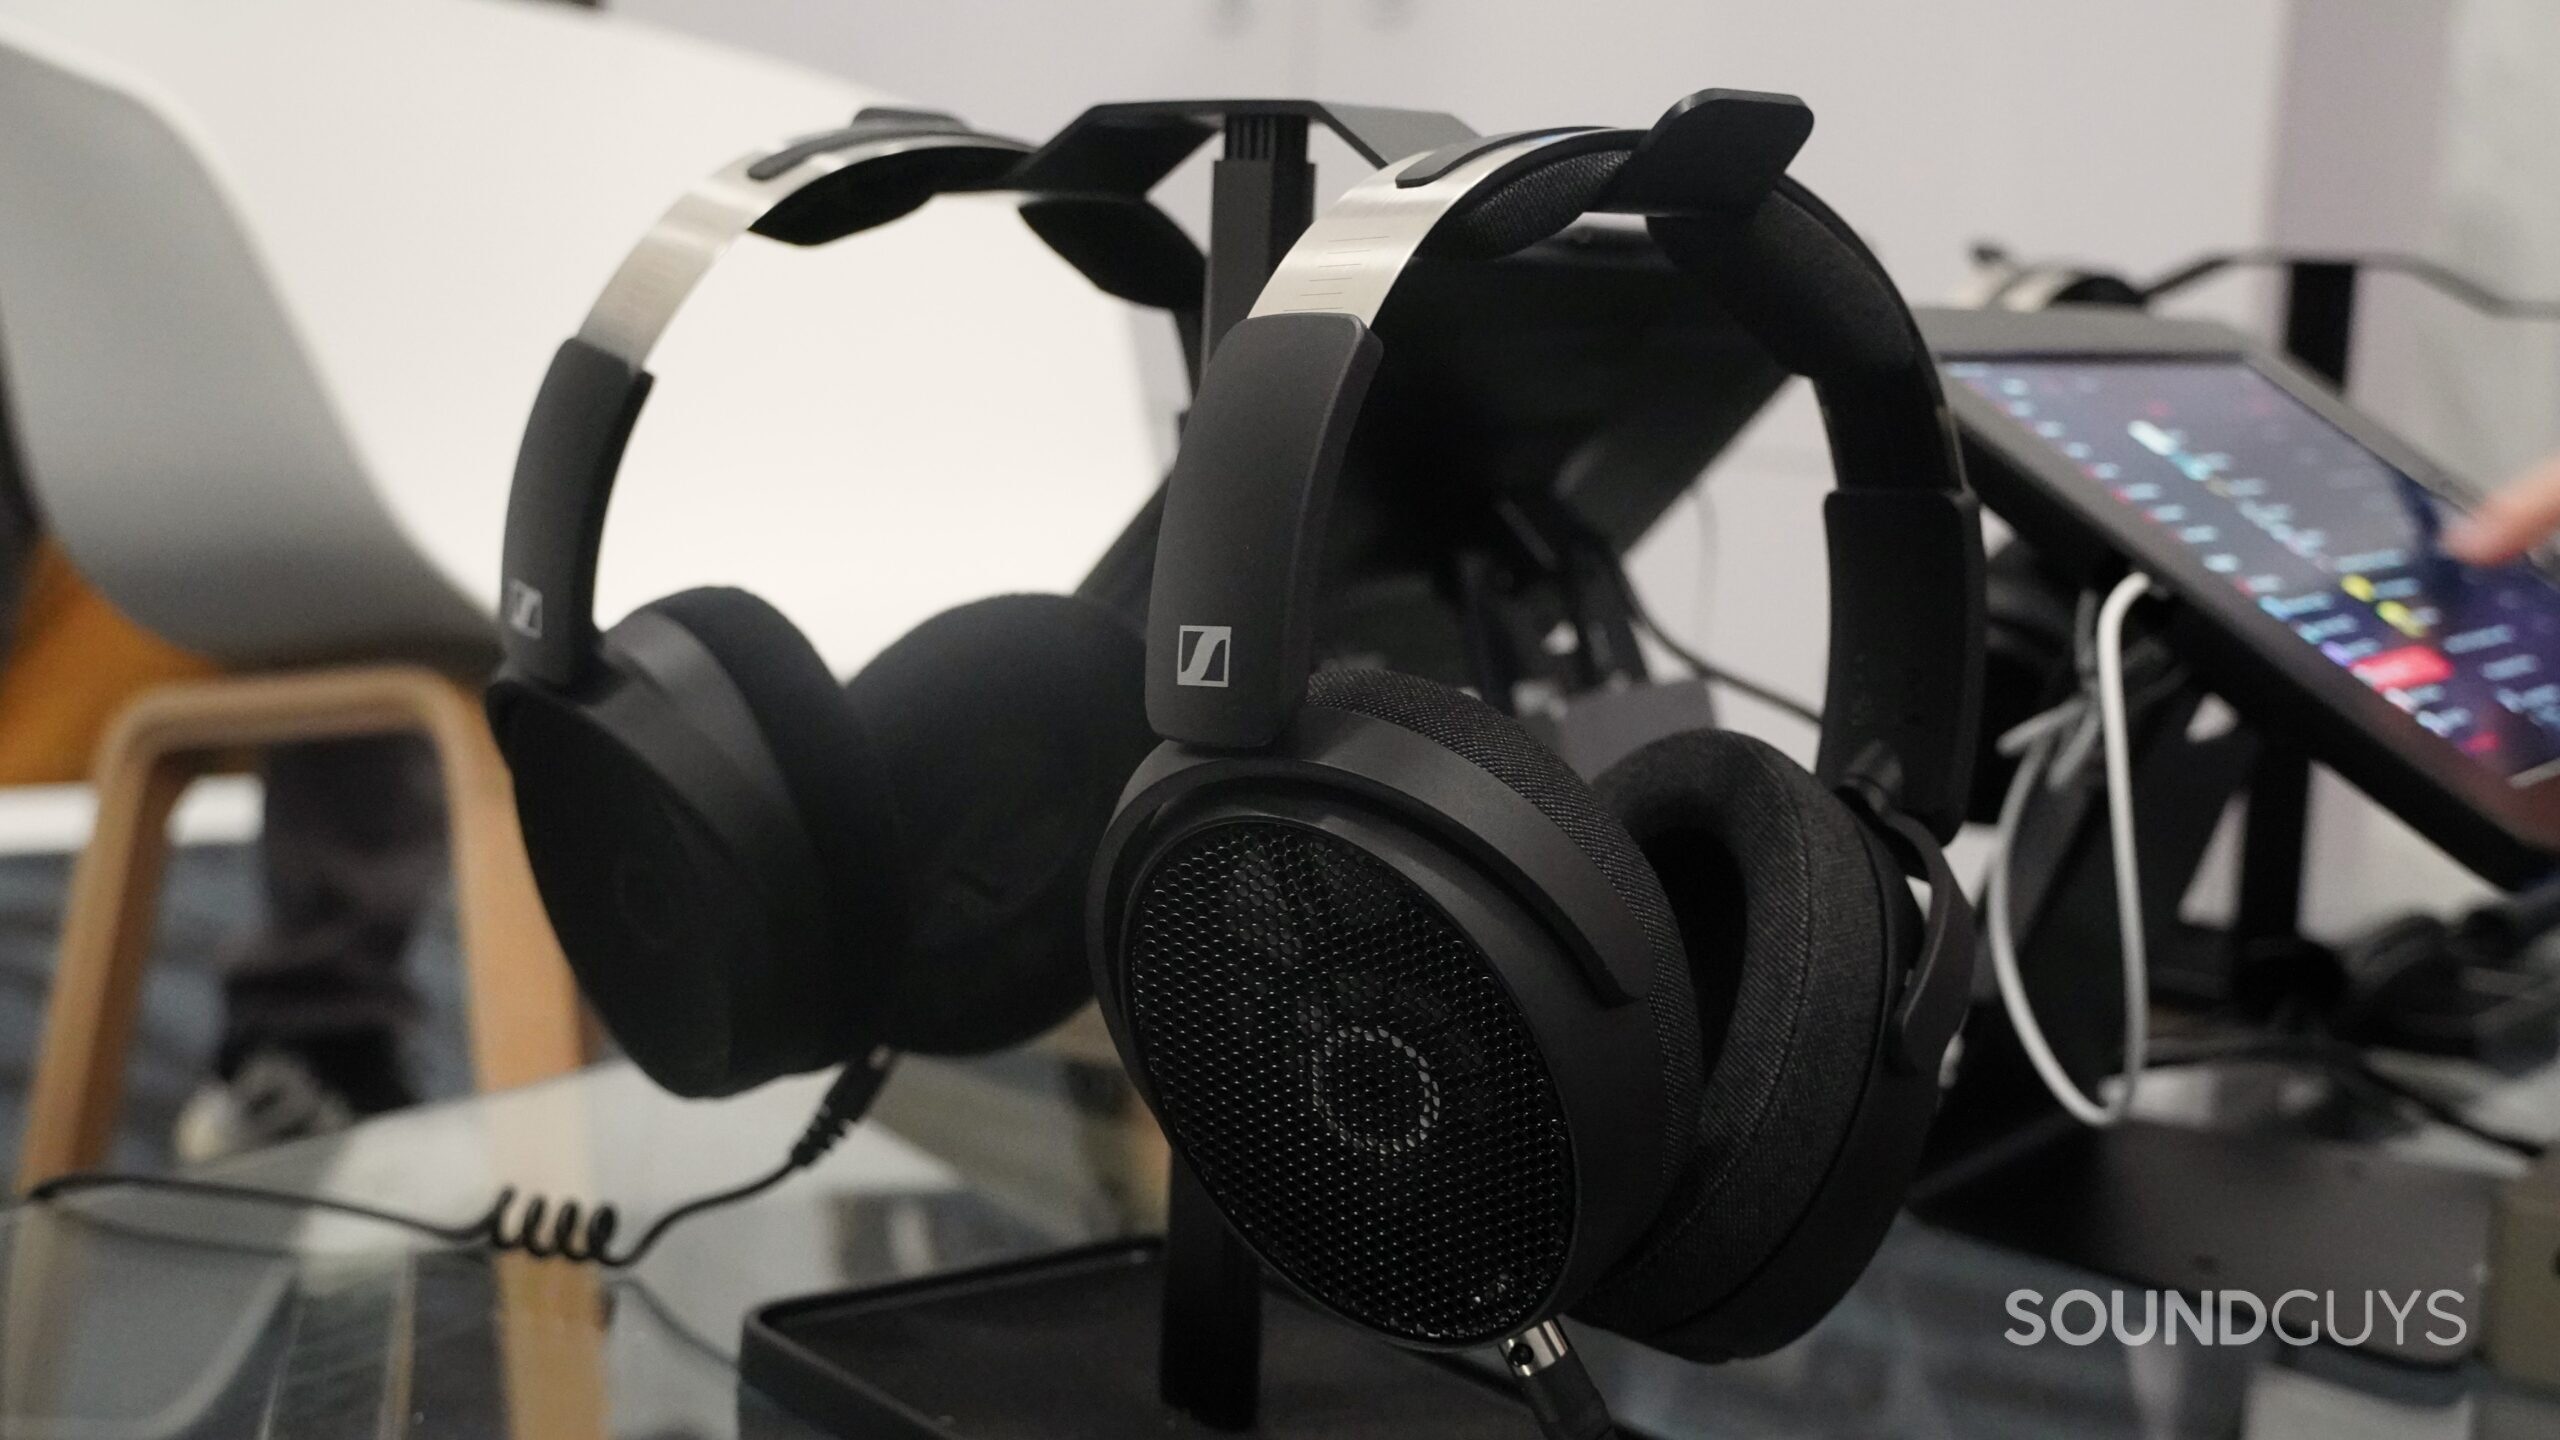 Two pairs of the Sennheiser HD 490 Pro open-back headphones.